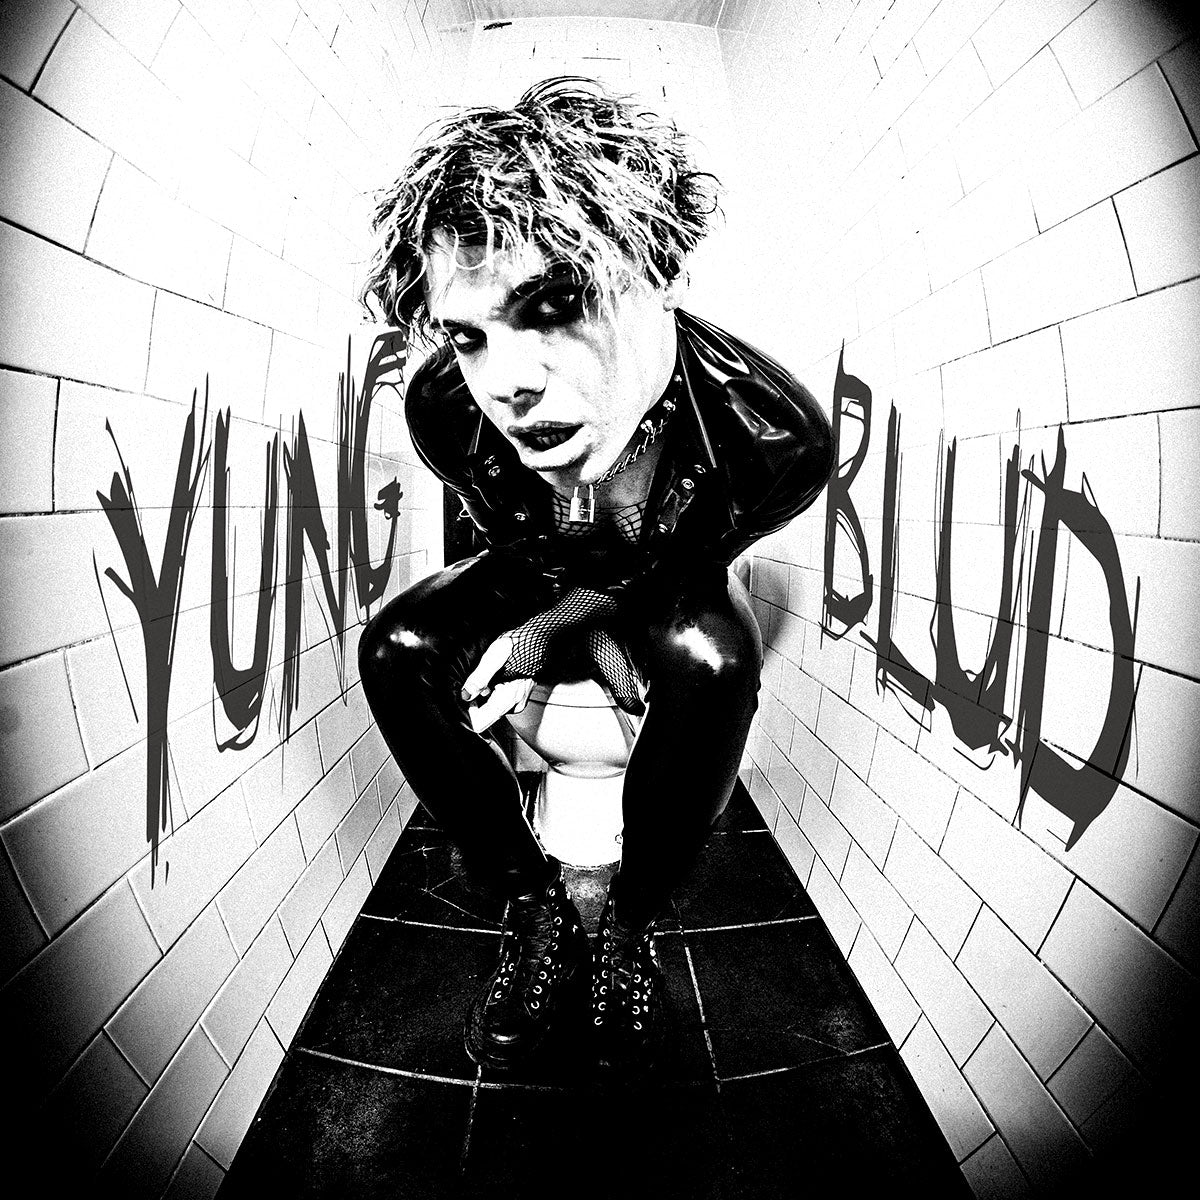 Yungblud - Rock Sound featured artists